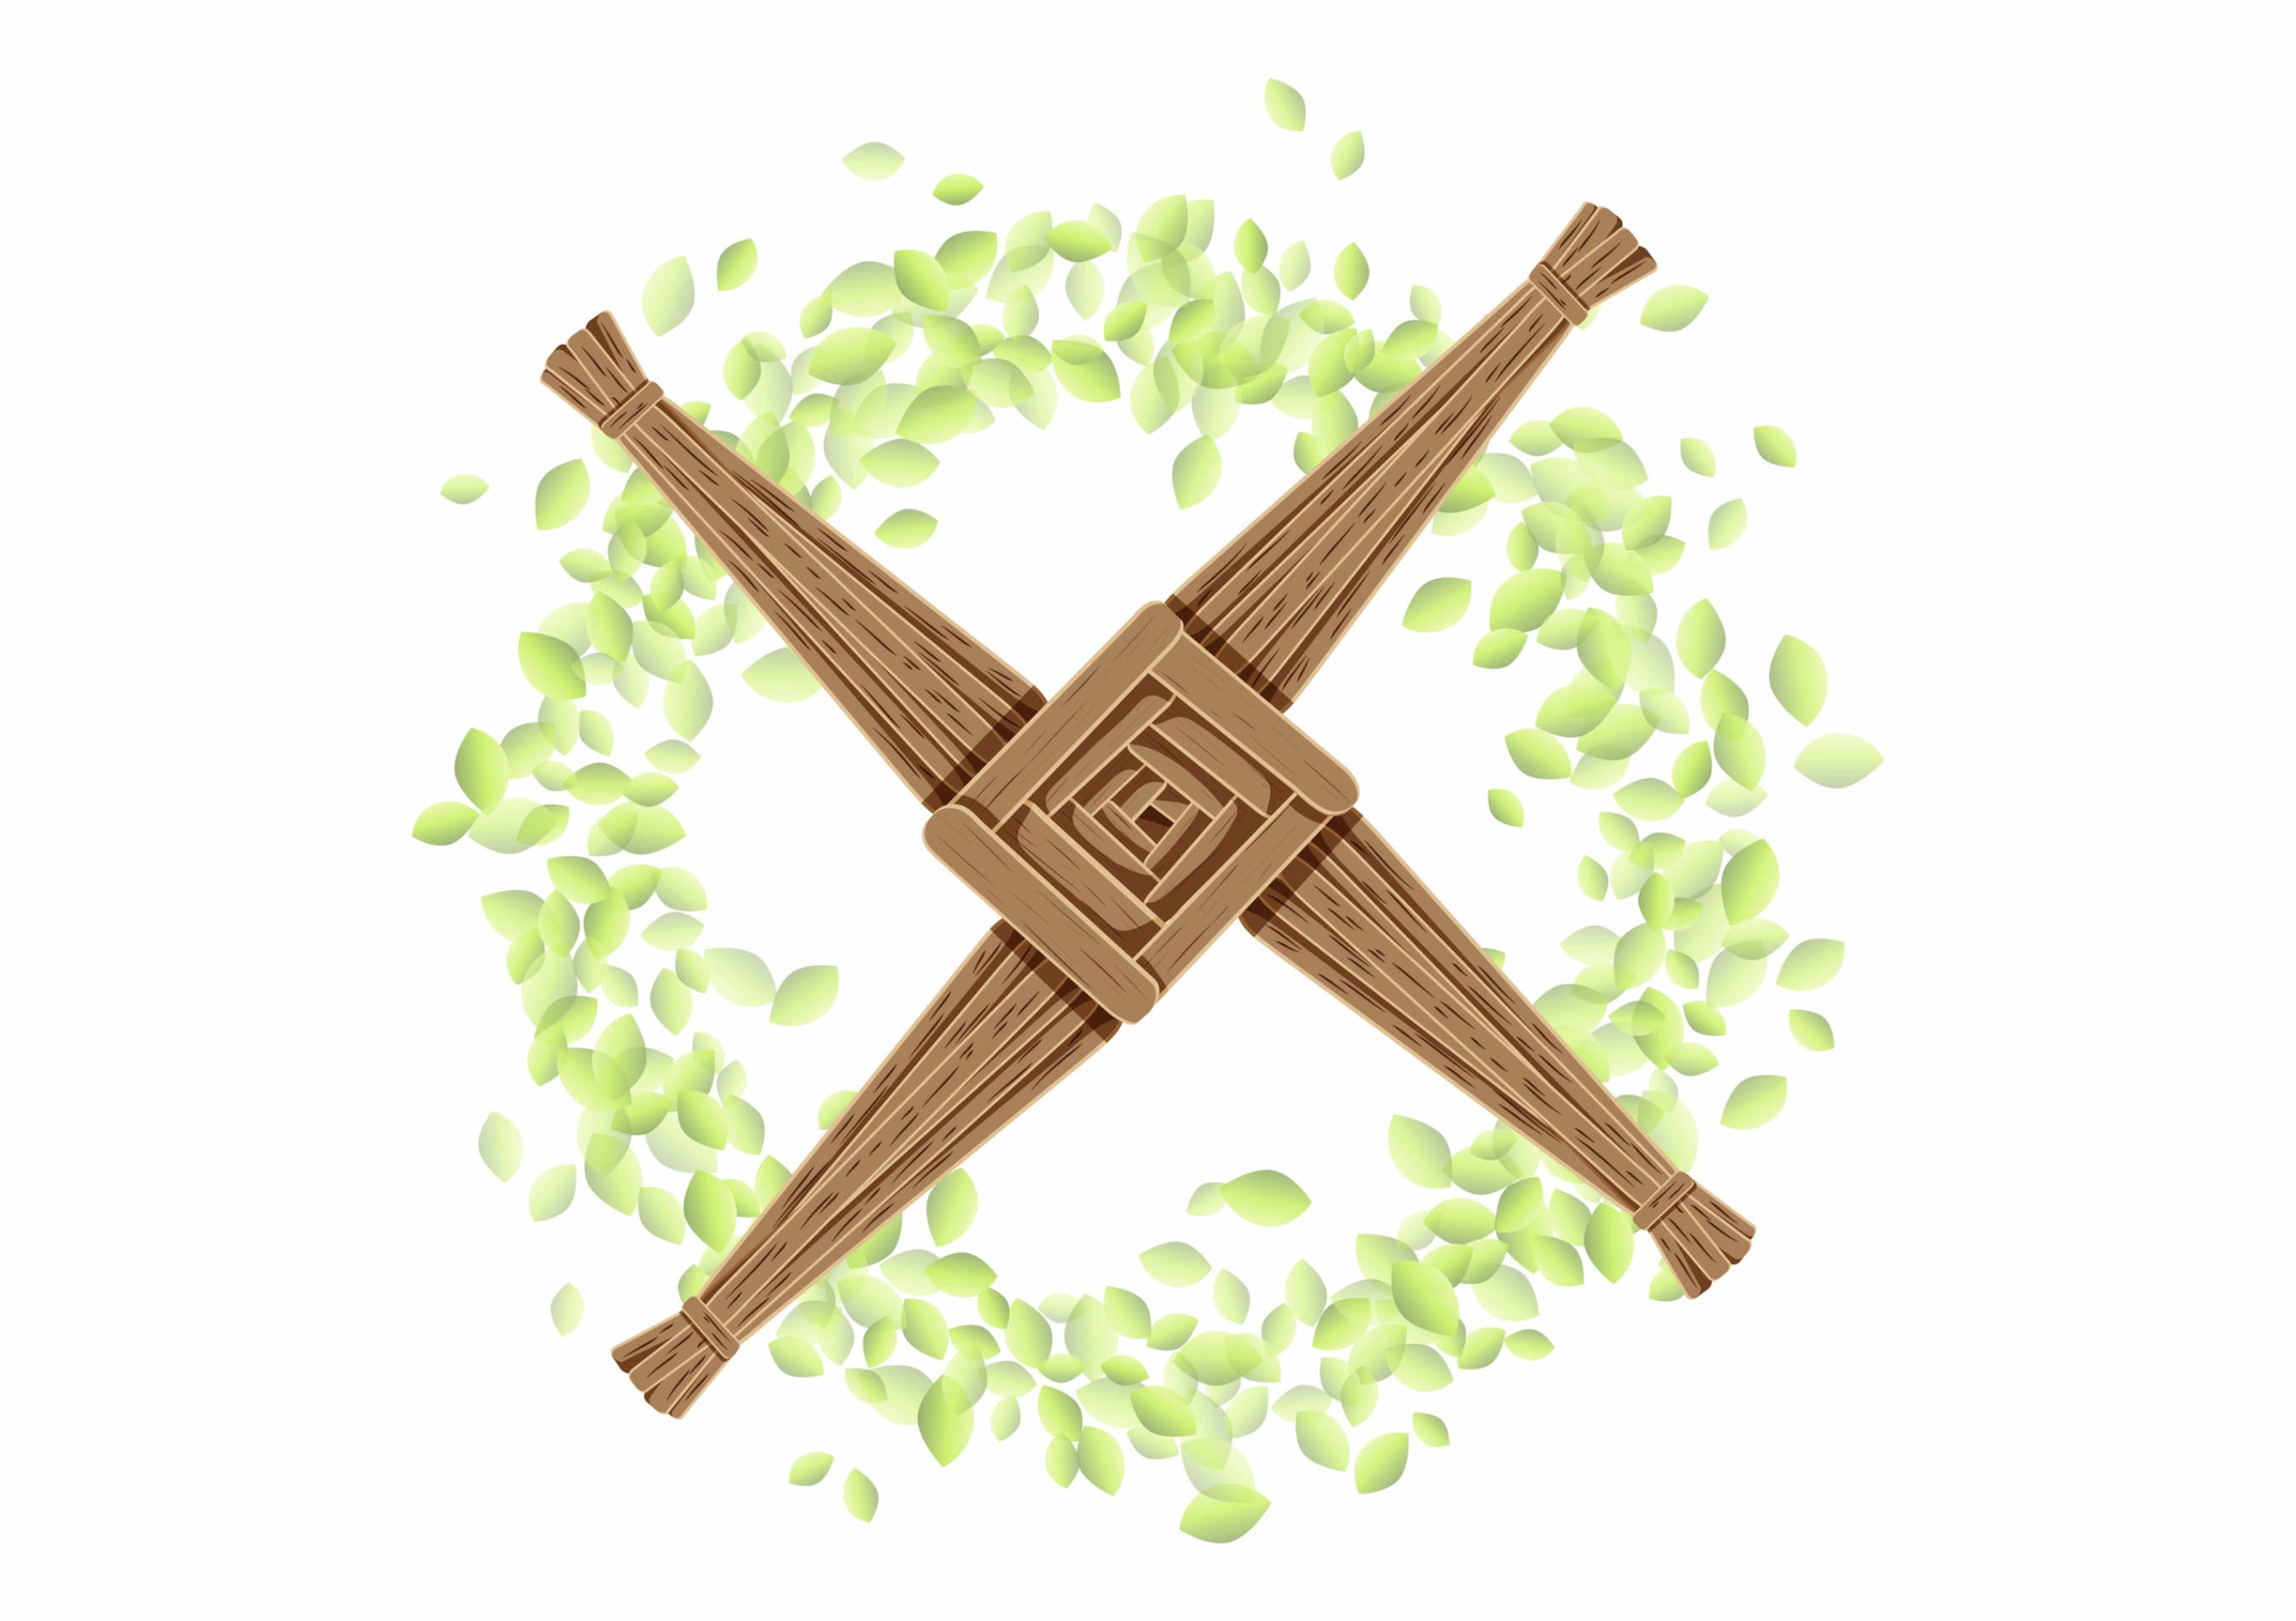 The History Behind St. Brigid's Day or Imbolc